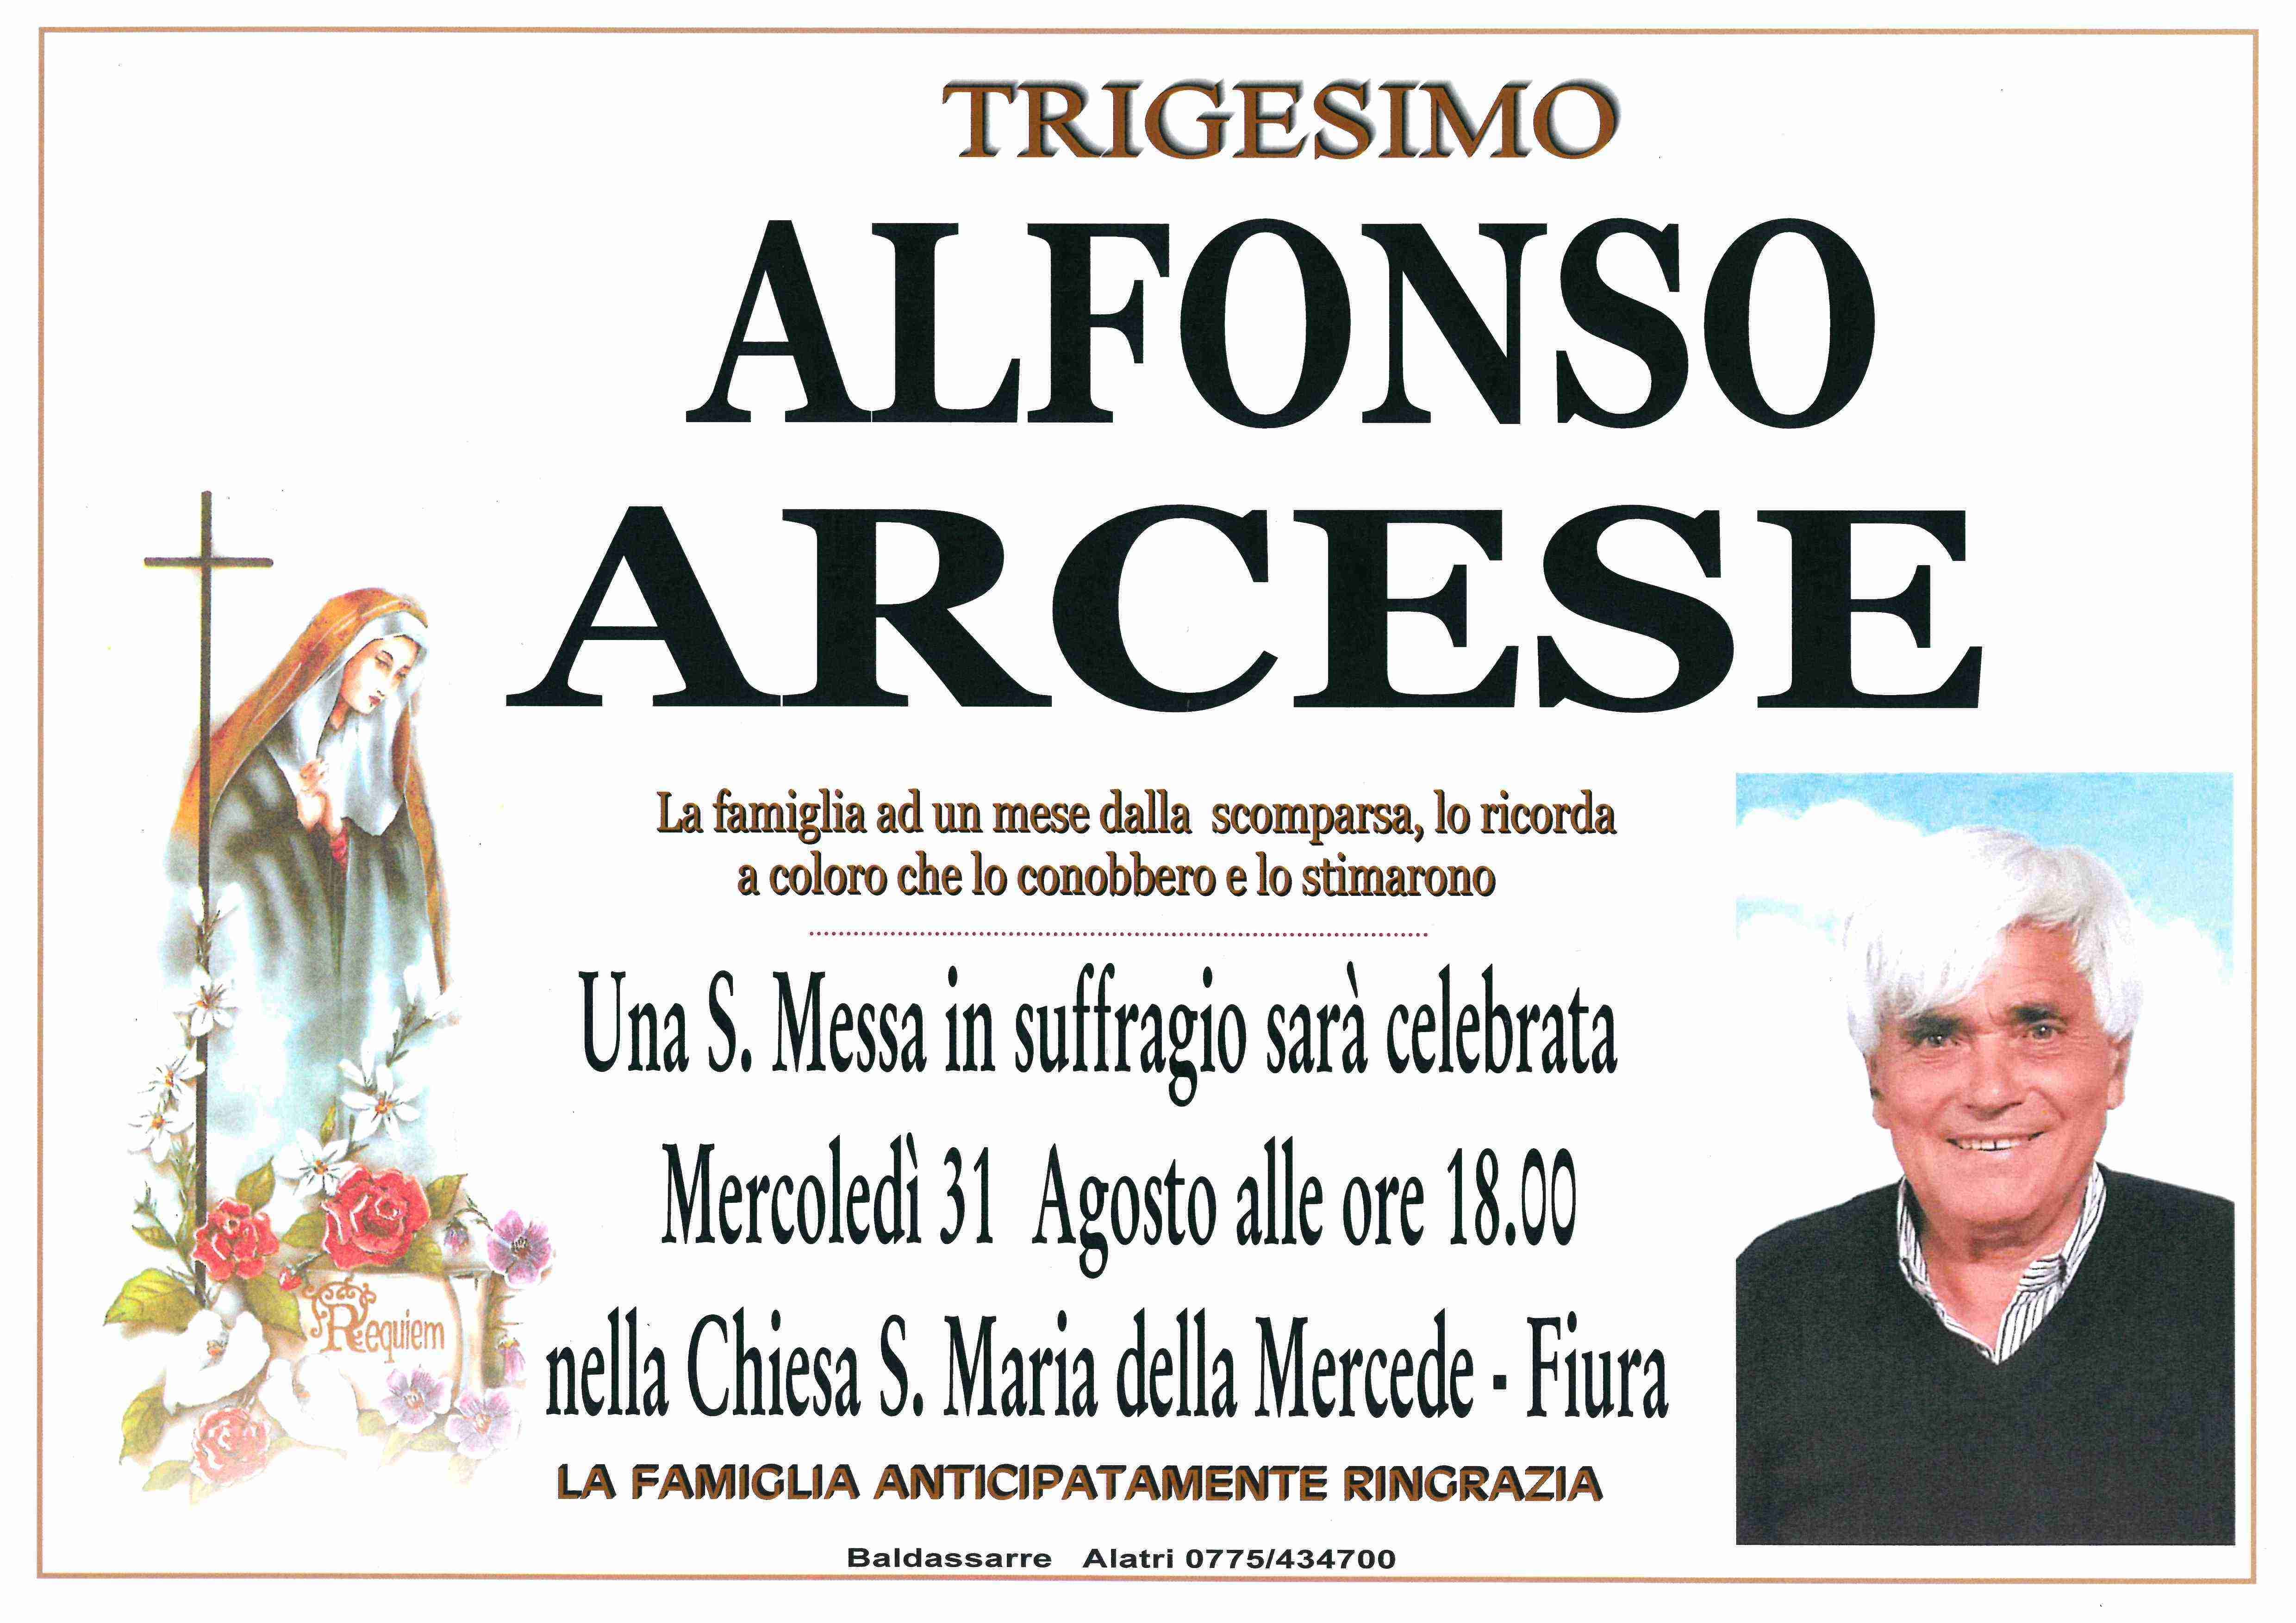 Alfonso Arcese